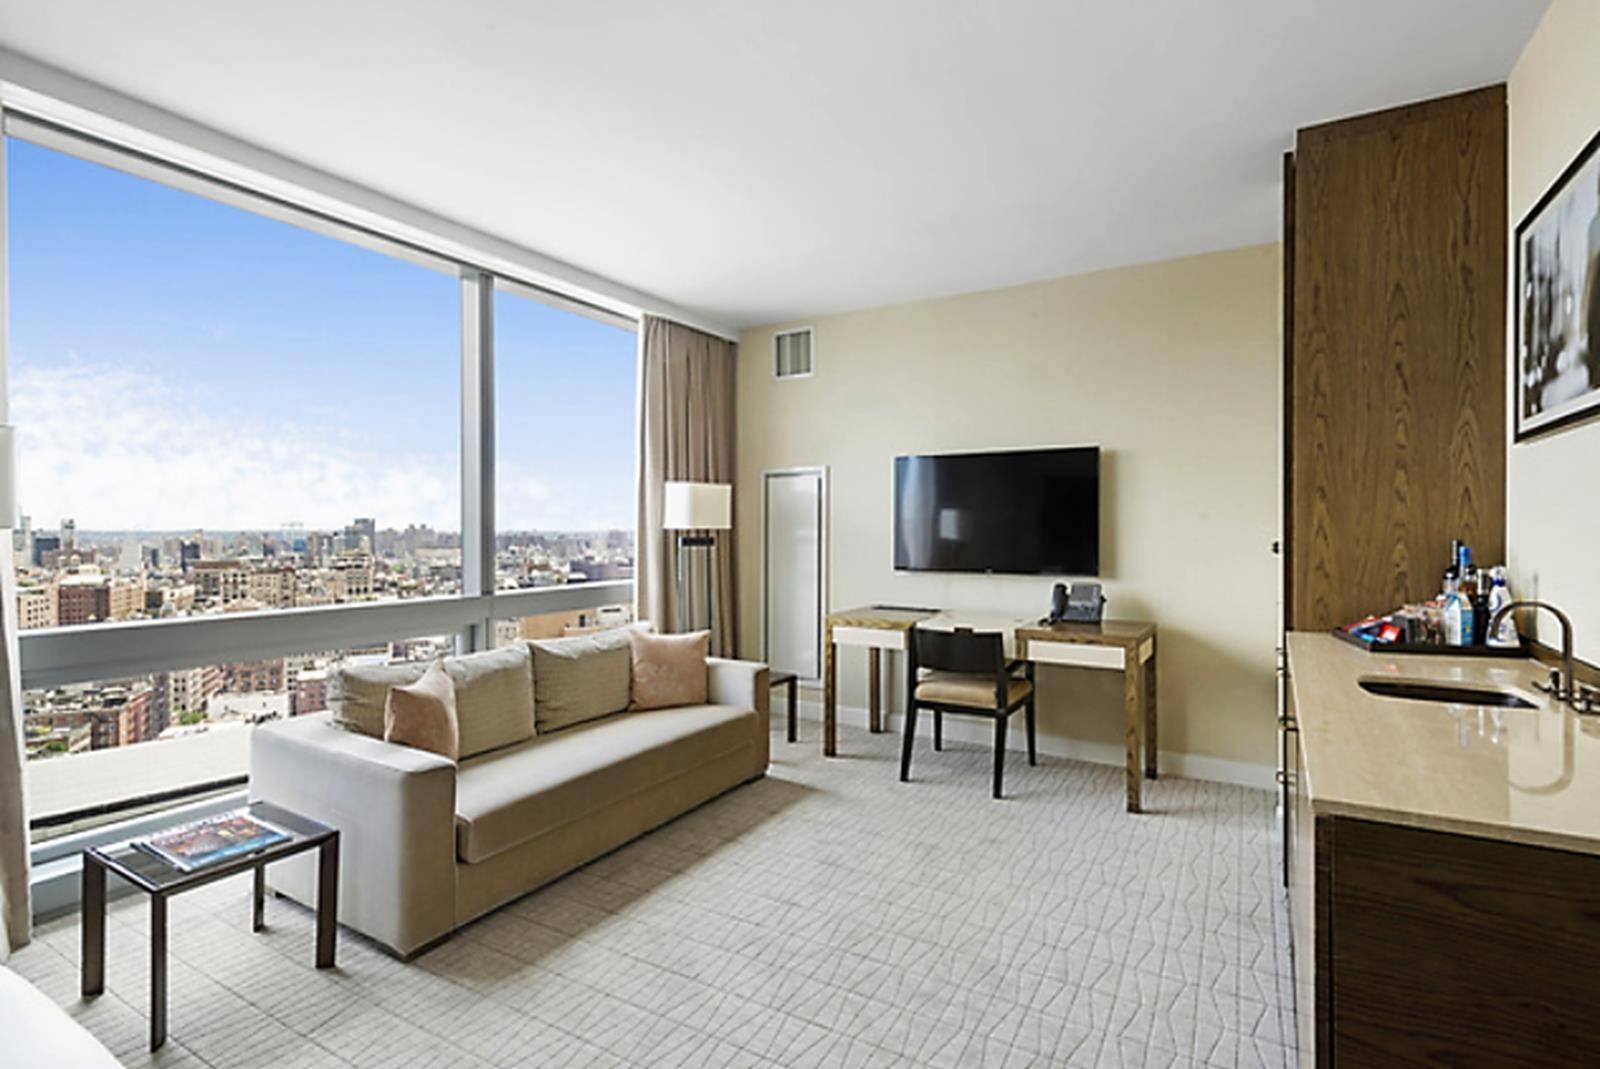 A high floor, premium view, fully furnished, one bedroom corner suite resale at the Trump SoHo Hotel Condominium.